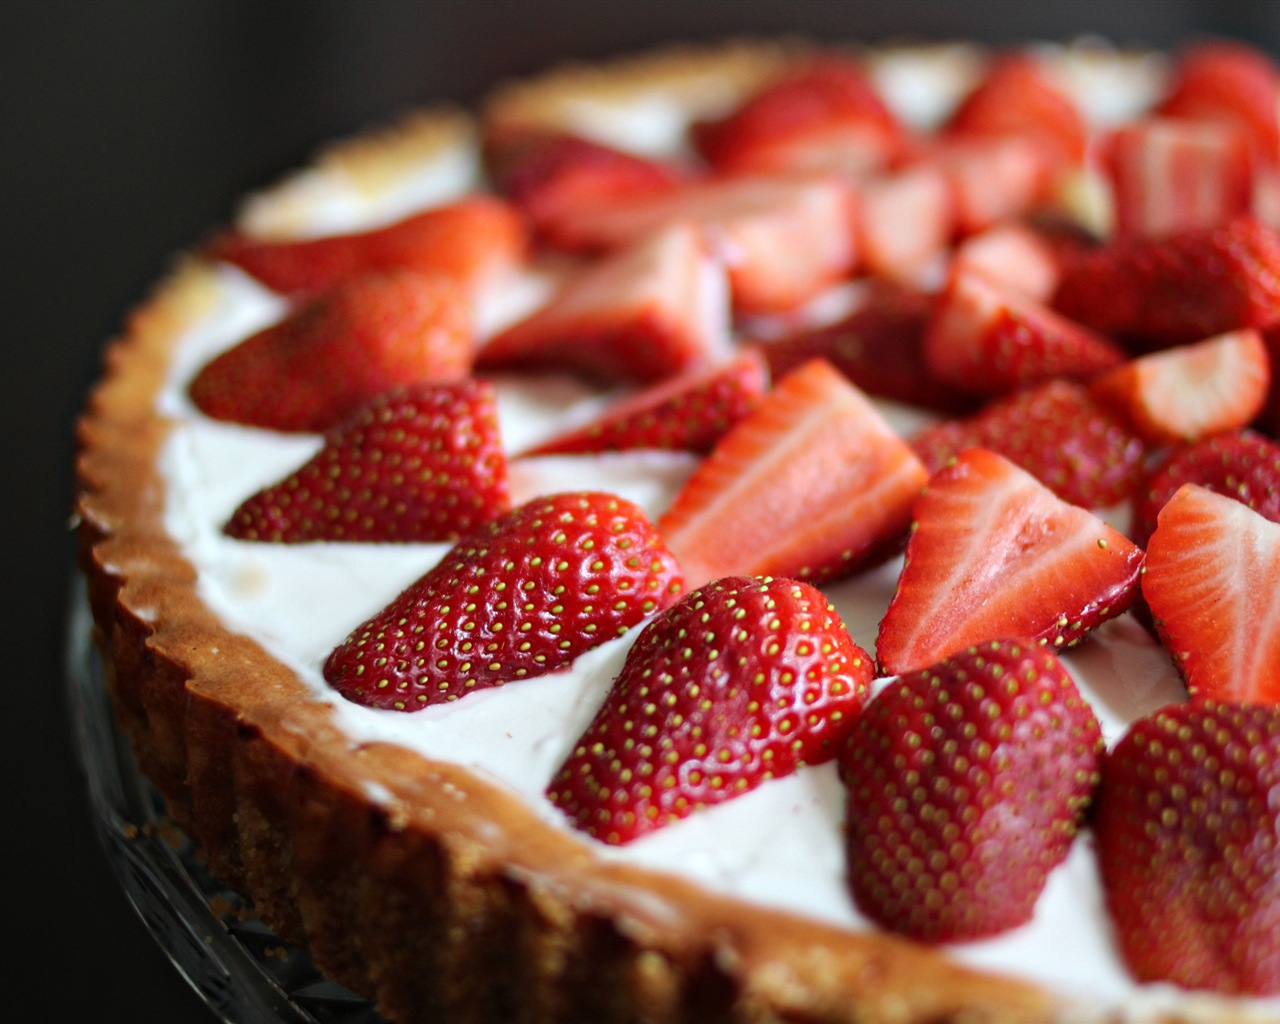 Delicious strawberry cake HD wallpapers #4 - 1280x1024